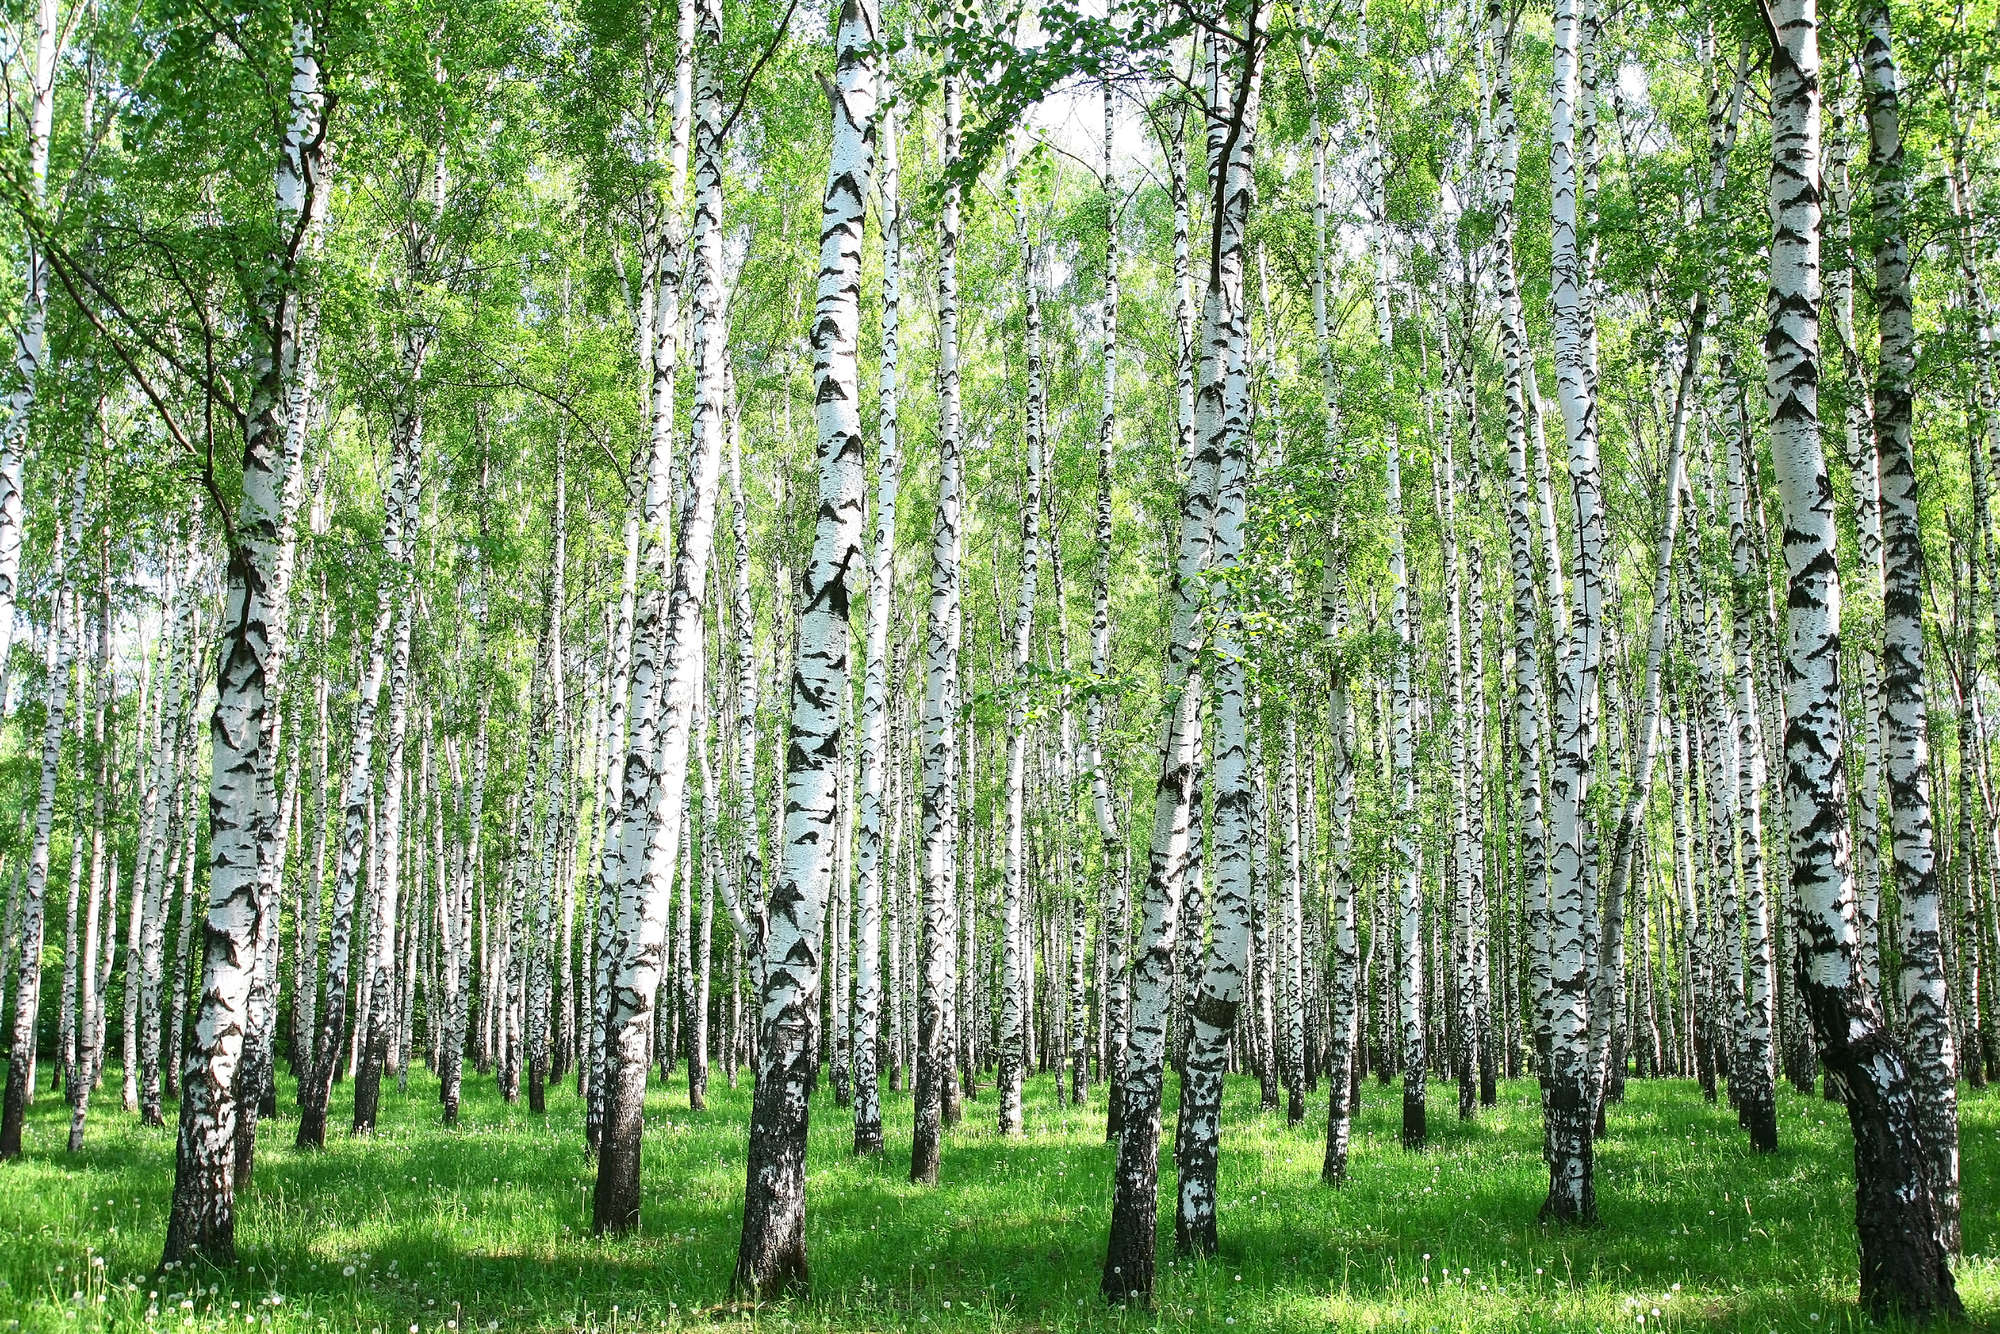             Nature wall mural birch forest motif on textured non-woven
        